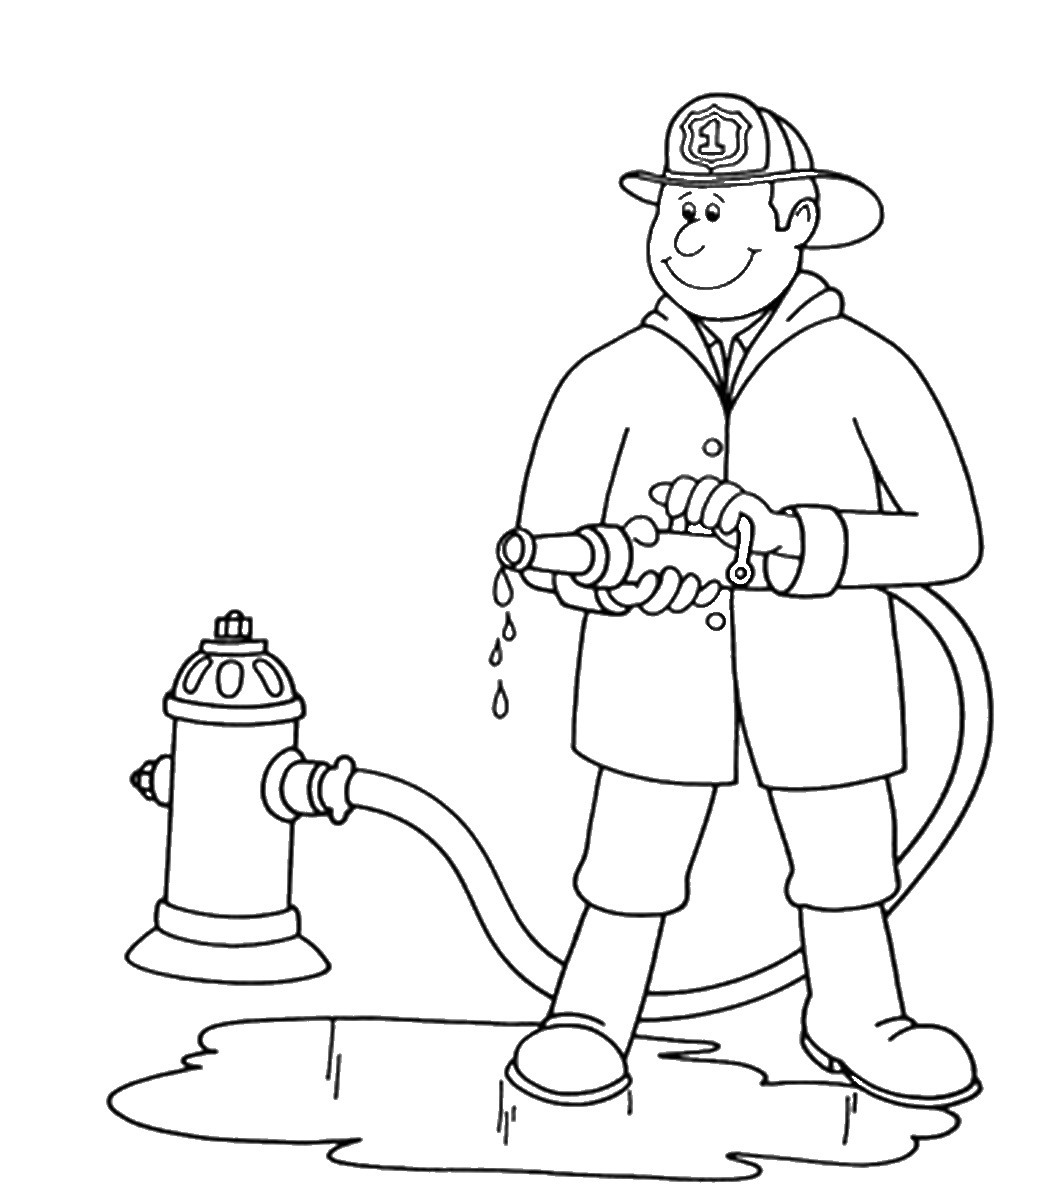 Free Firefighter Cliparts Black Download Free Clip Art Free Clip Art On Clipart Library We found for you 15 fireman clipart black and white png images with total size: clipart library